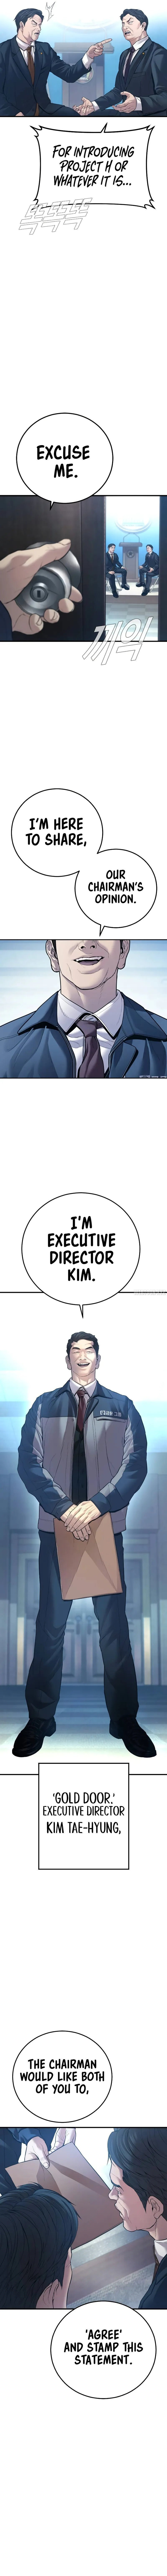 manager-kim-chap-135-2